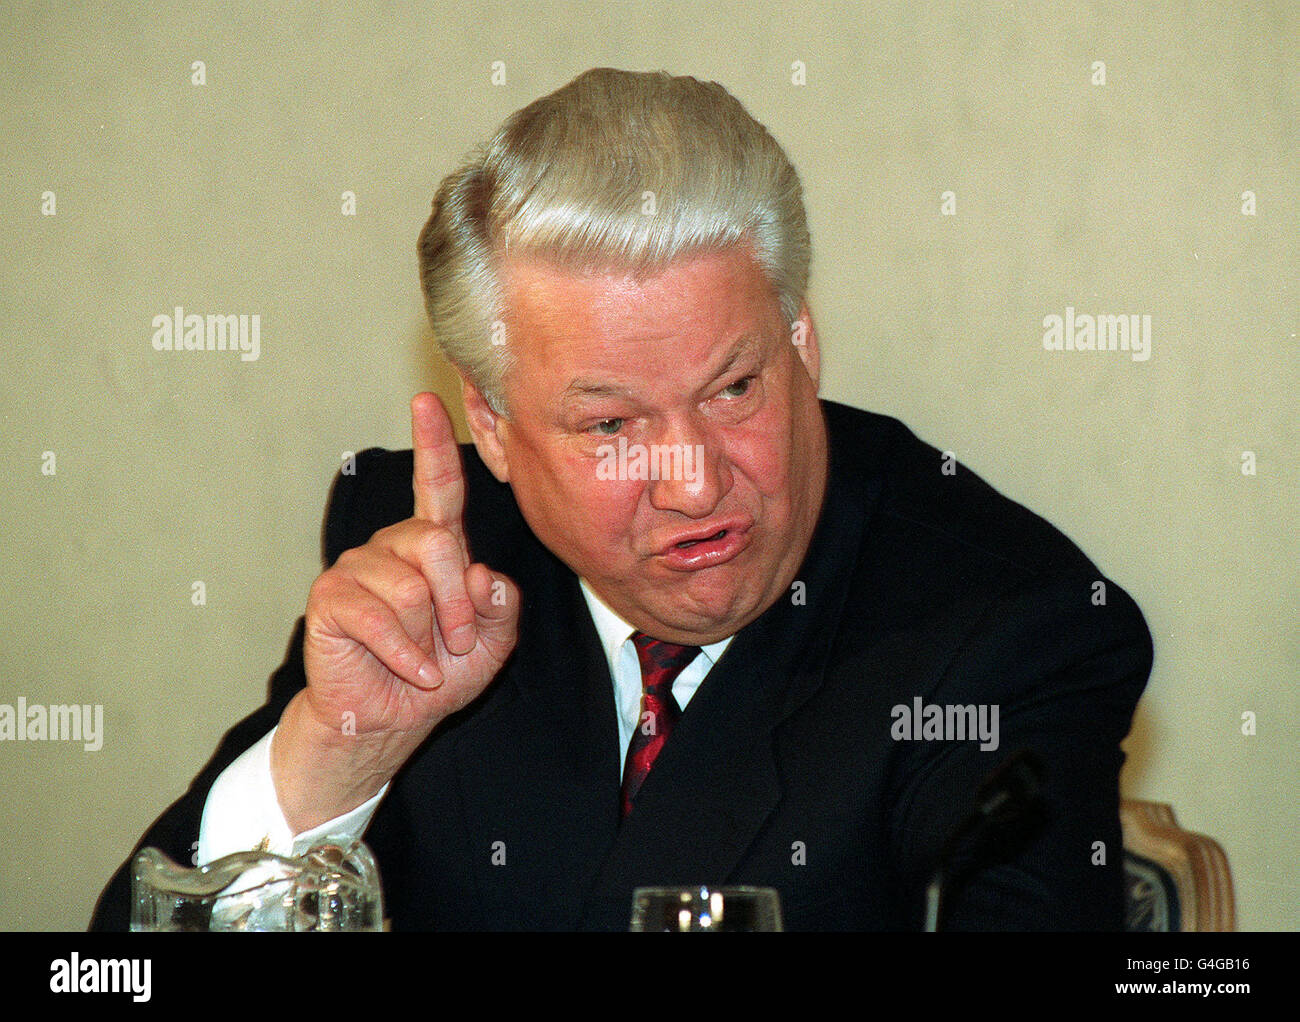 MARCH 26: On this day in 1989, the first free elections were held in the USSR, as Boris Yeltsin is surprisingly elected to the Soviet parliament. This was the first time in Russia since 1917 that people actually had a chance to vote in a national election. PA NEWS PHOTO 10/11/92 RUSSIAN PRESIDENT BORIS YELTSIN DURING A NEWS CONFERENCE AT HYDE PARK HOTEL IN LONDON Stock Photo